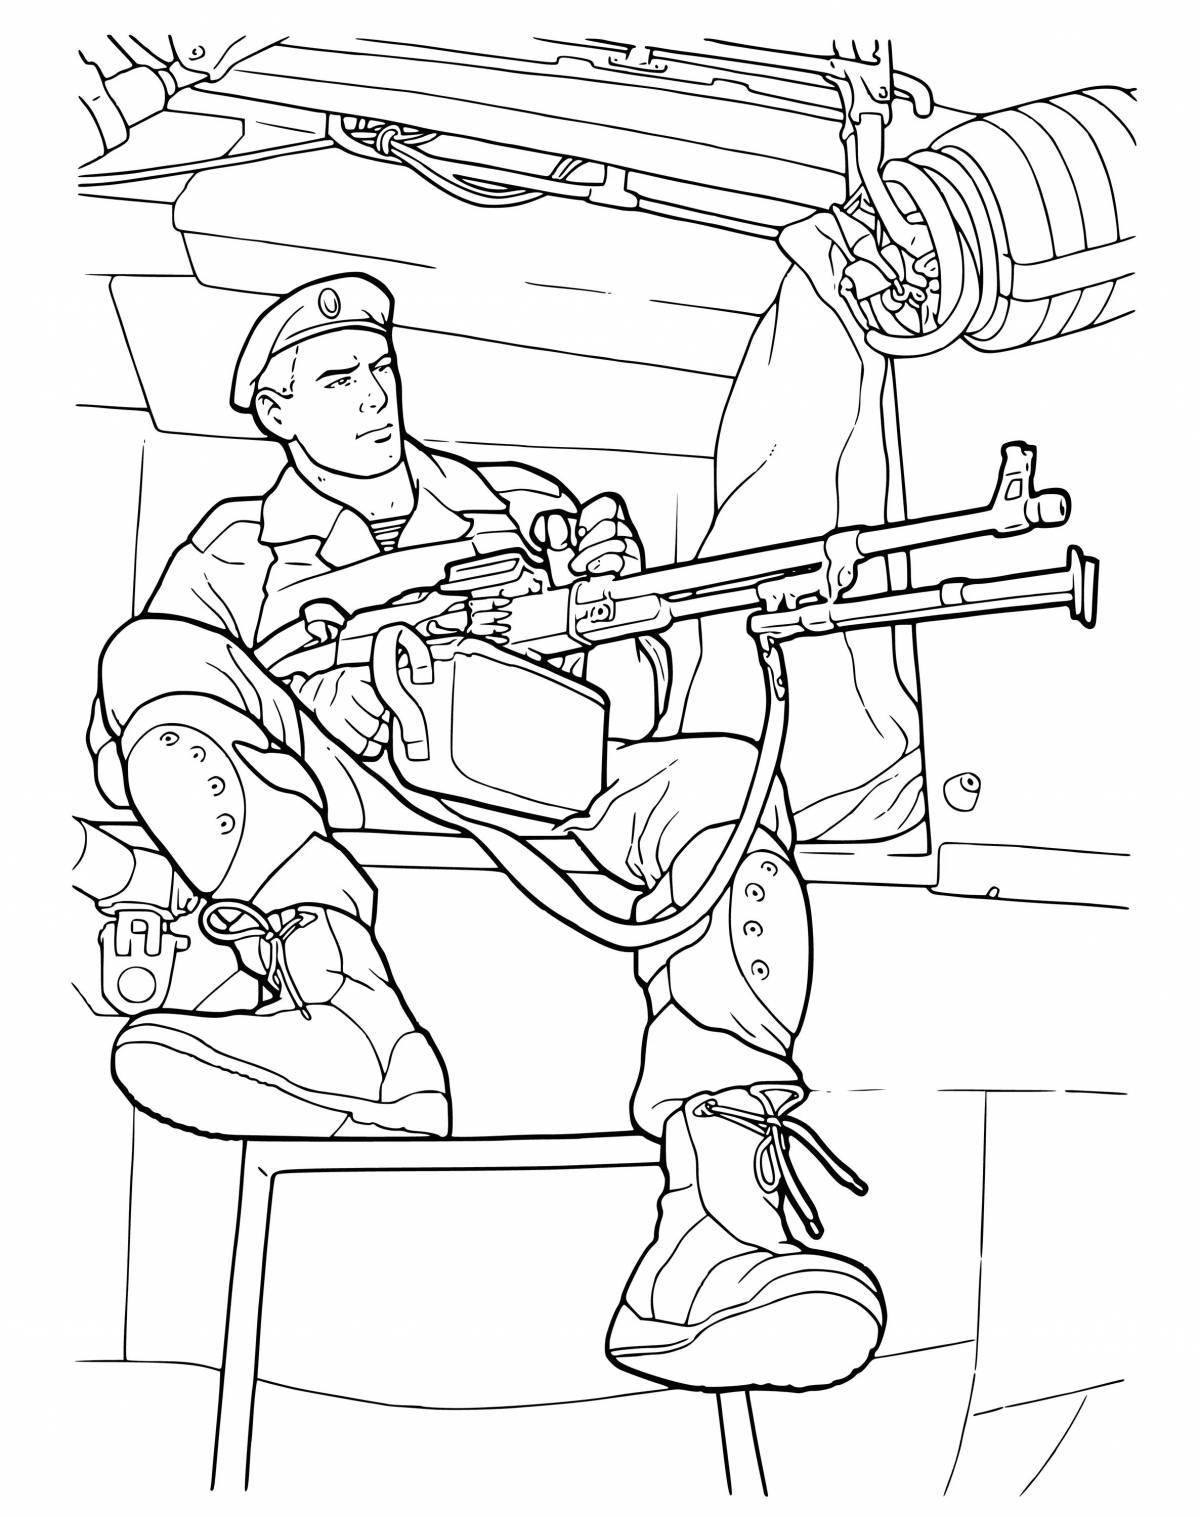 Royal Russian soldier coloring page